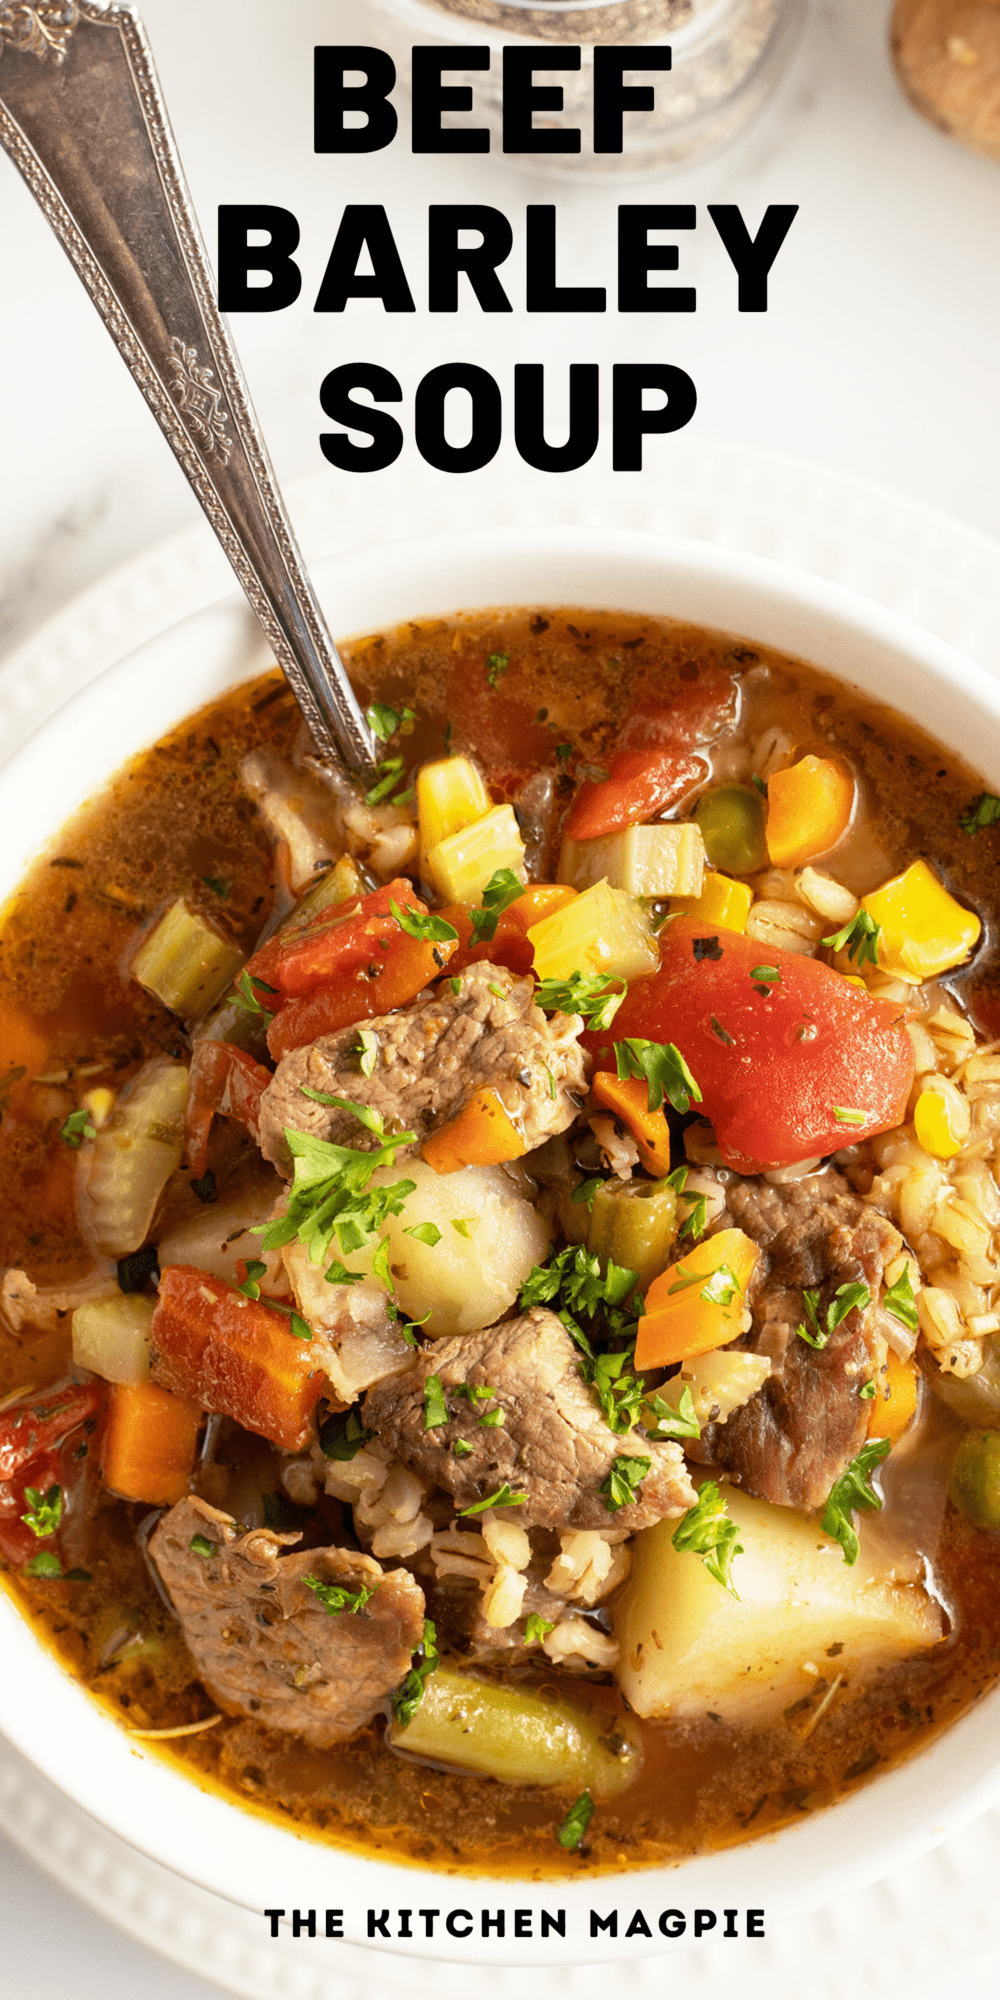  Made of affordable ingredients but cooked long enough to turn them tasty, this classic beef and barley soup is perfect for a filling family meal.